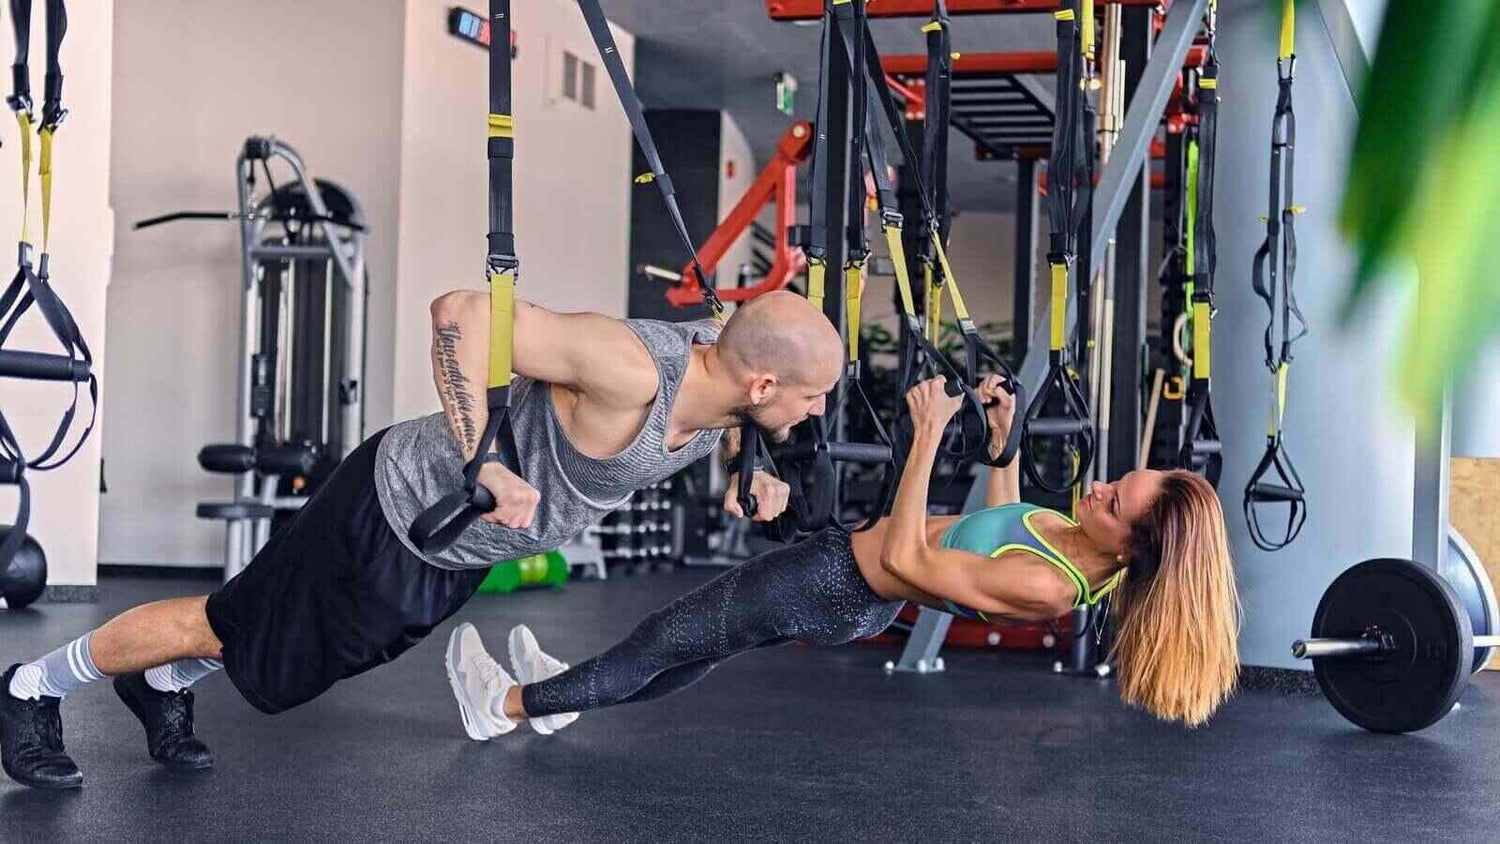 Fitness Woman Workout on TRX Straps in Gym. Crossfit Style